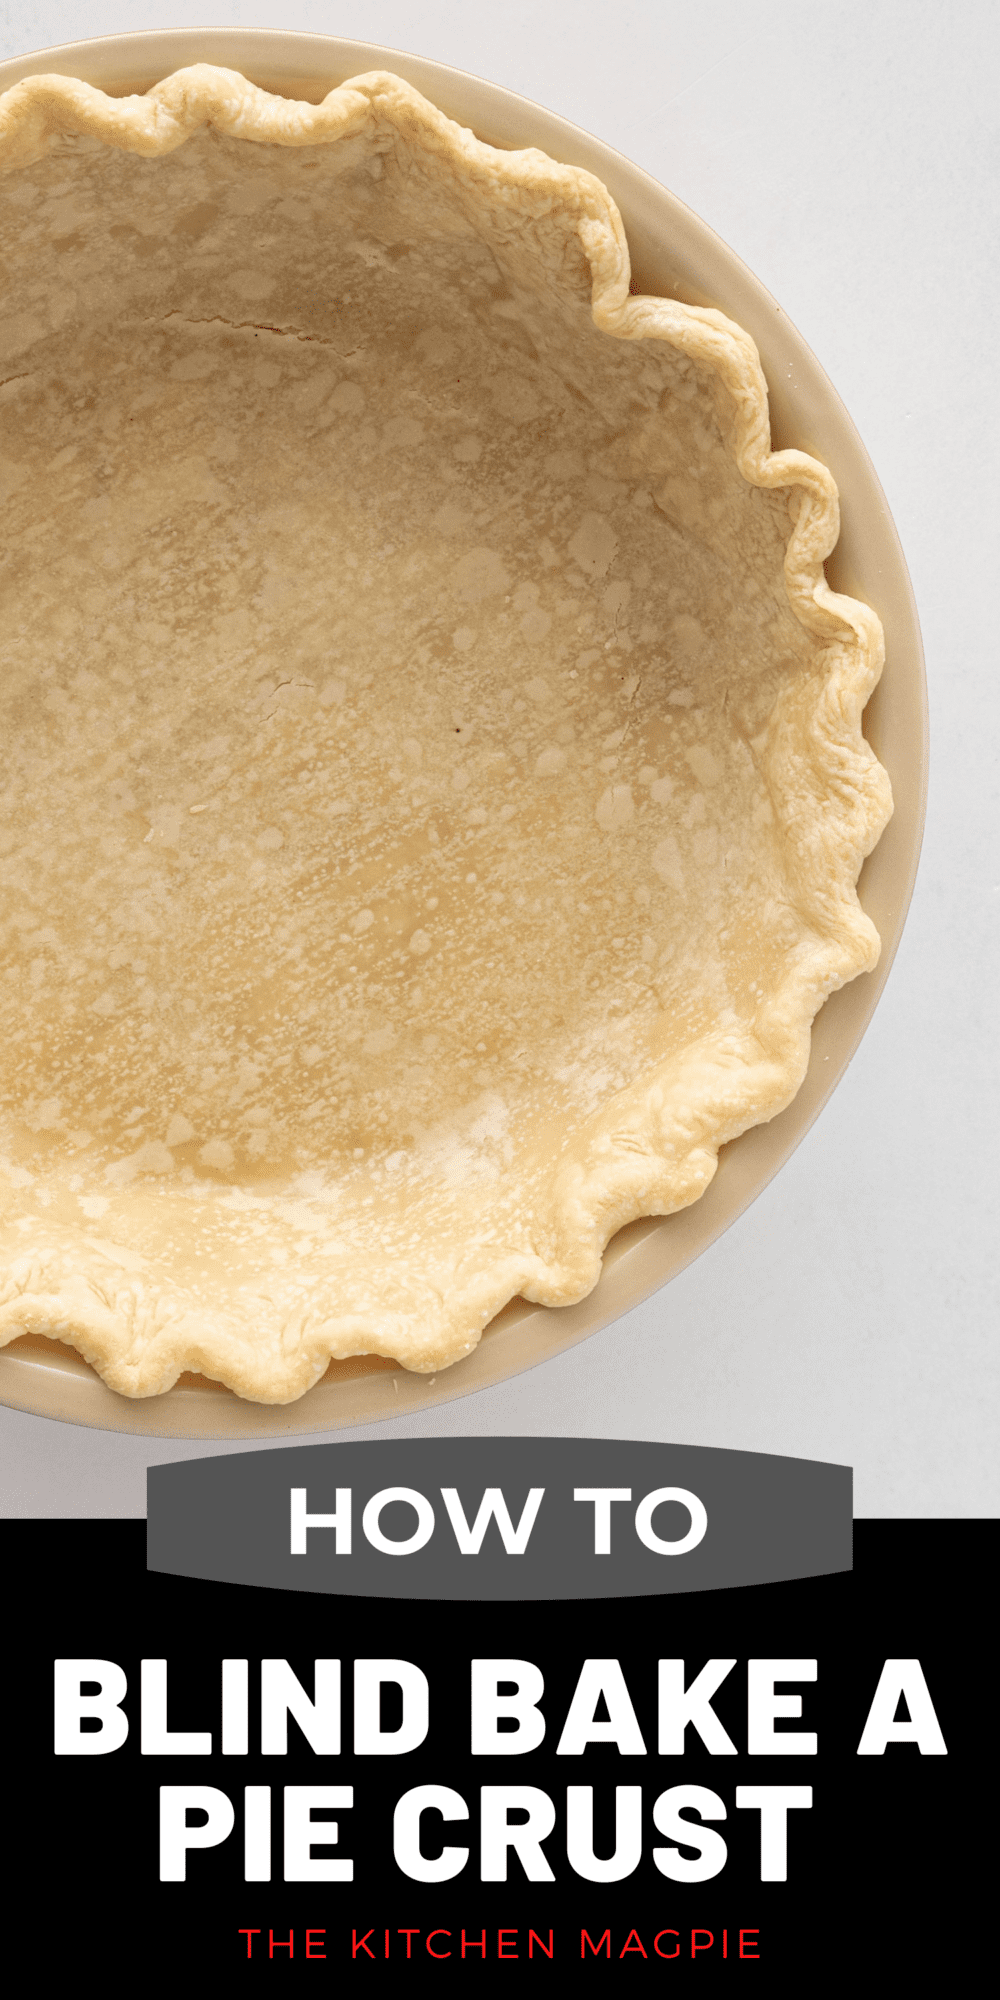 How to blind bake a pie crust with step by step photo instructions. Use this method for recipes that need a partially baked pie crust. 